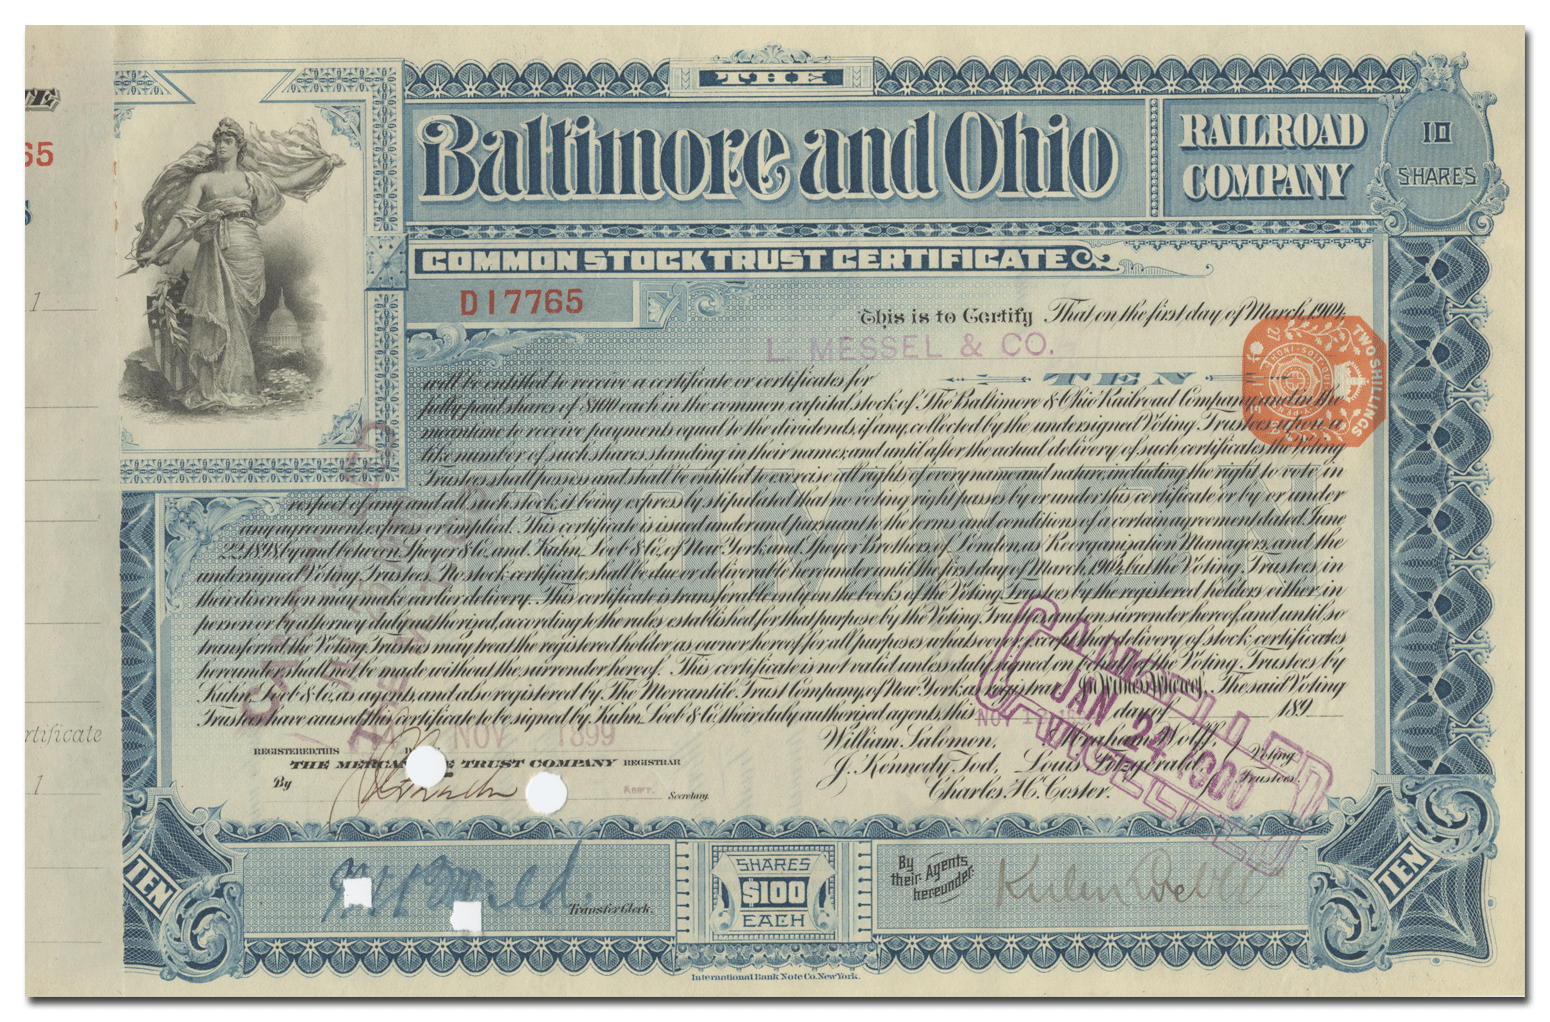 New York, Chicago and St. Louis Railroad Company Stock Certificate - Ghosts  of Wall Street